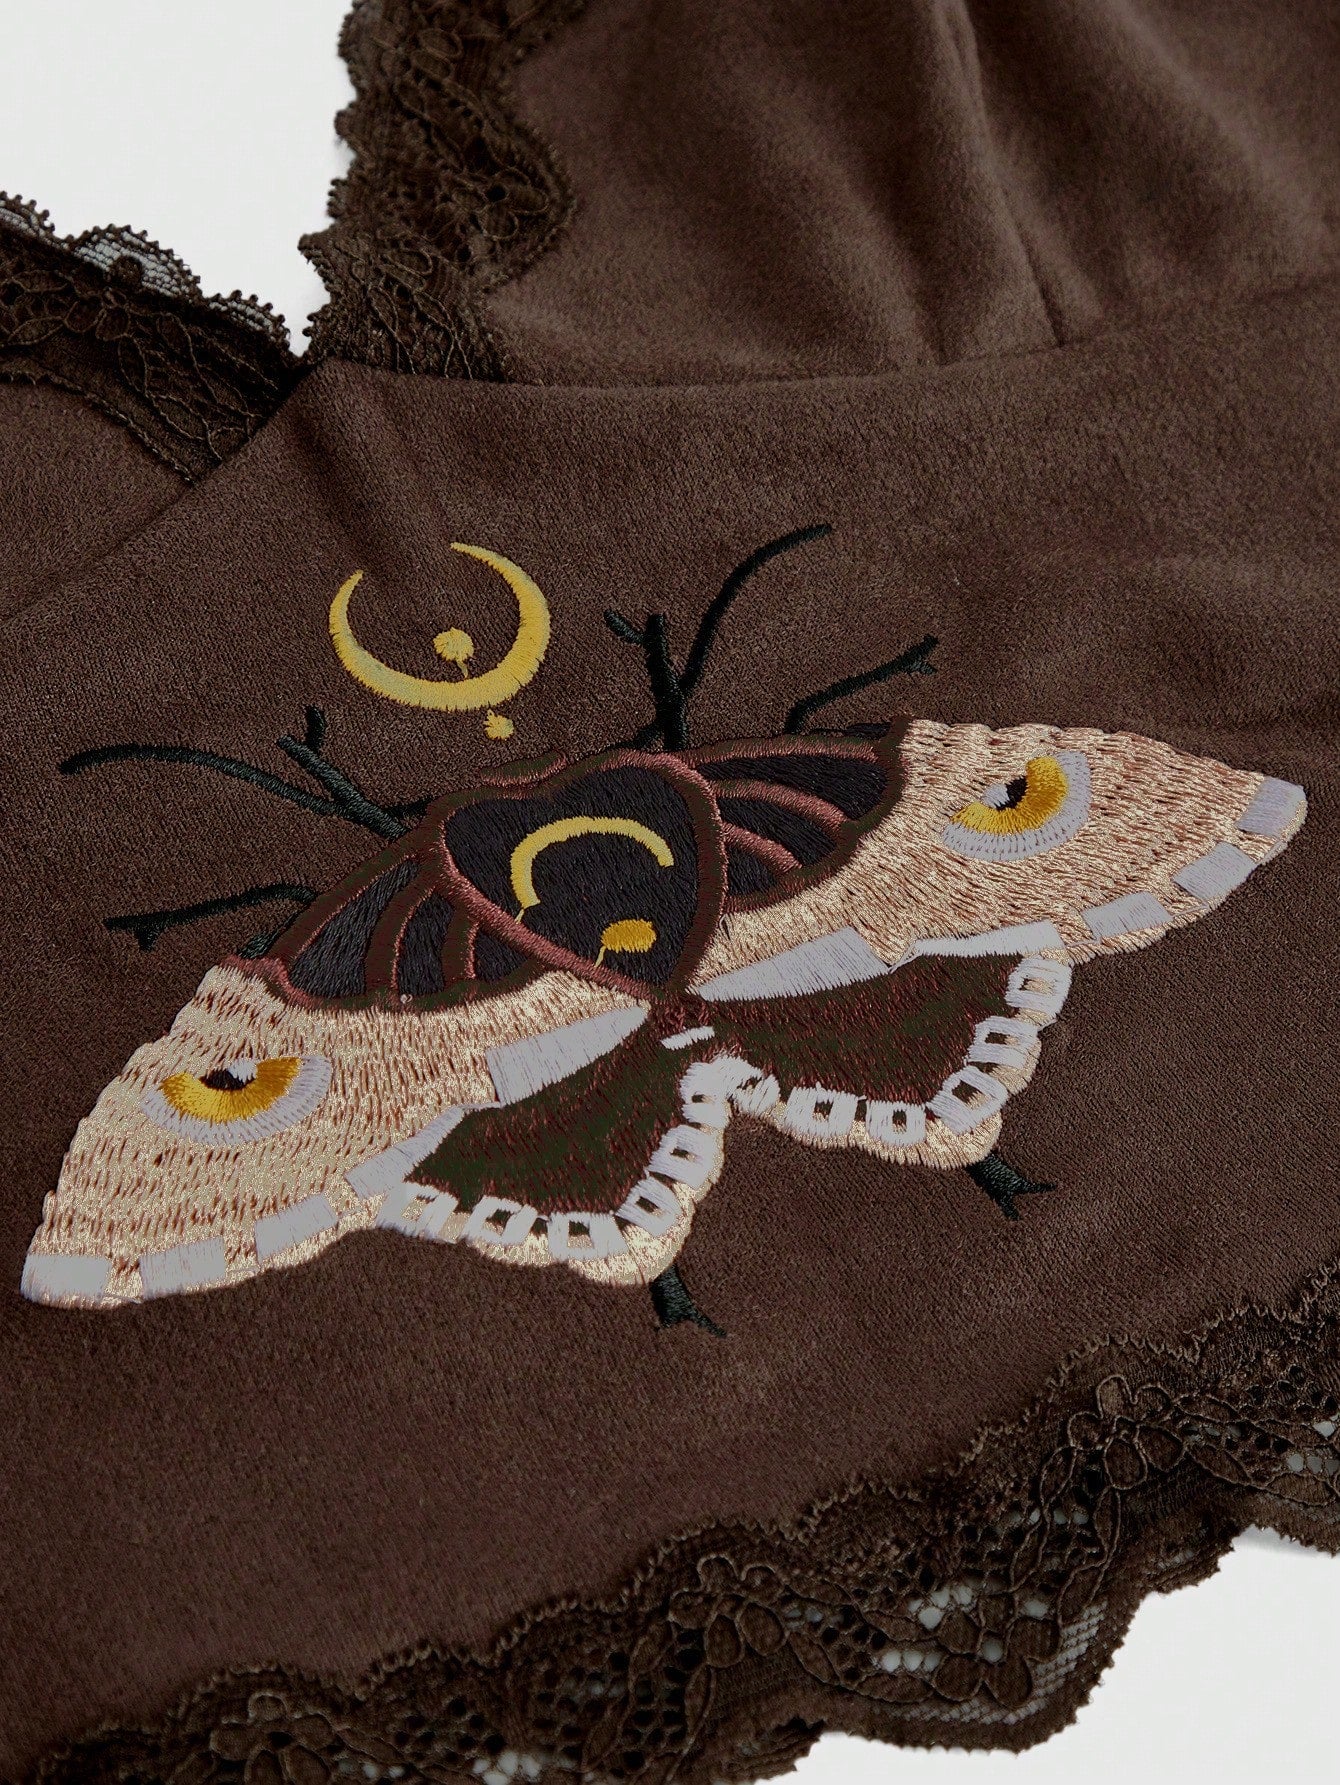 Moth Embroidery & Lace Splicing Camisole Top